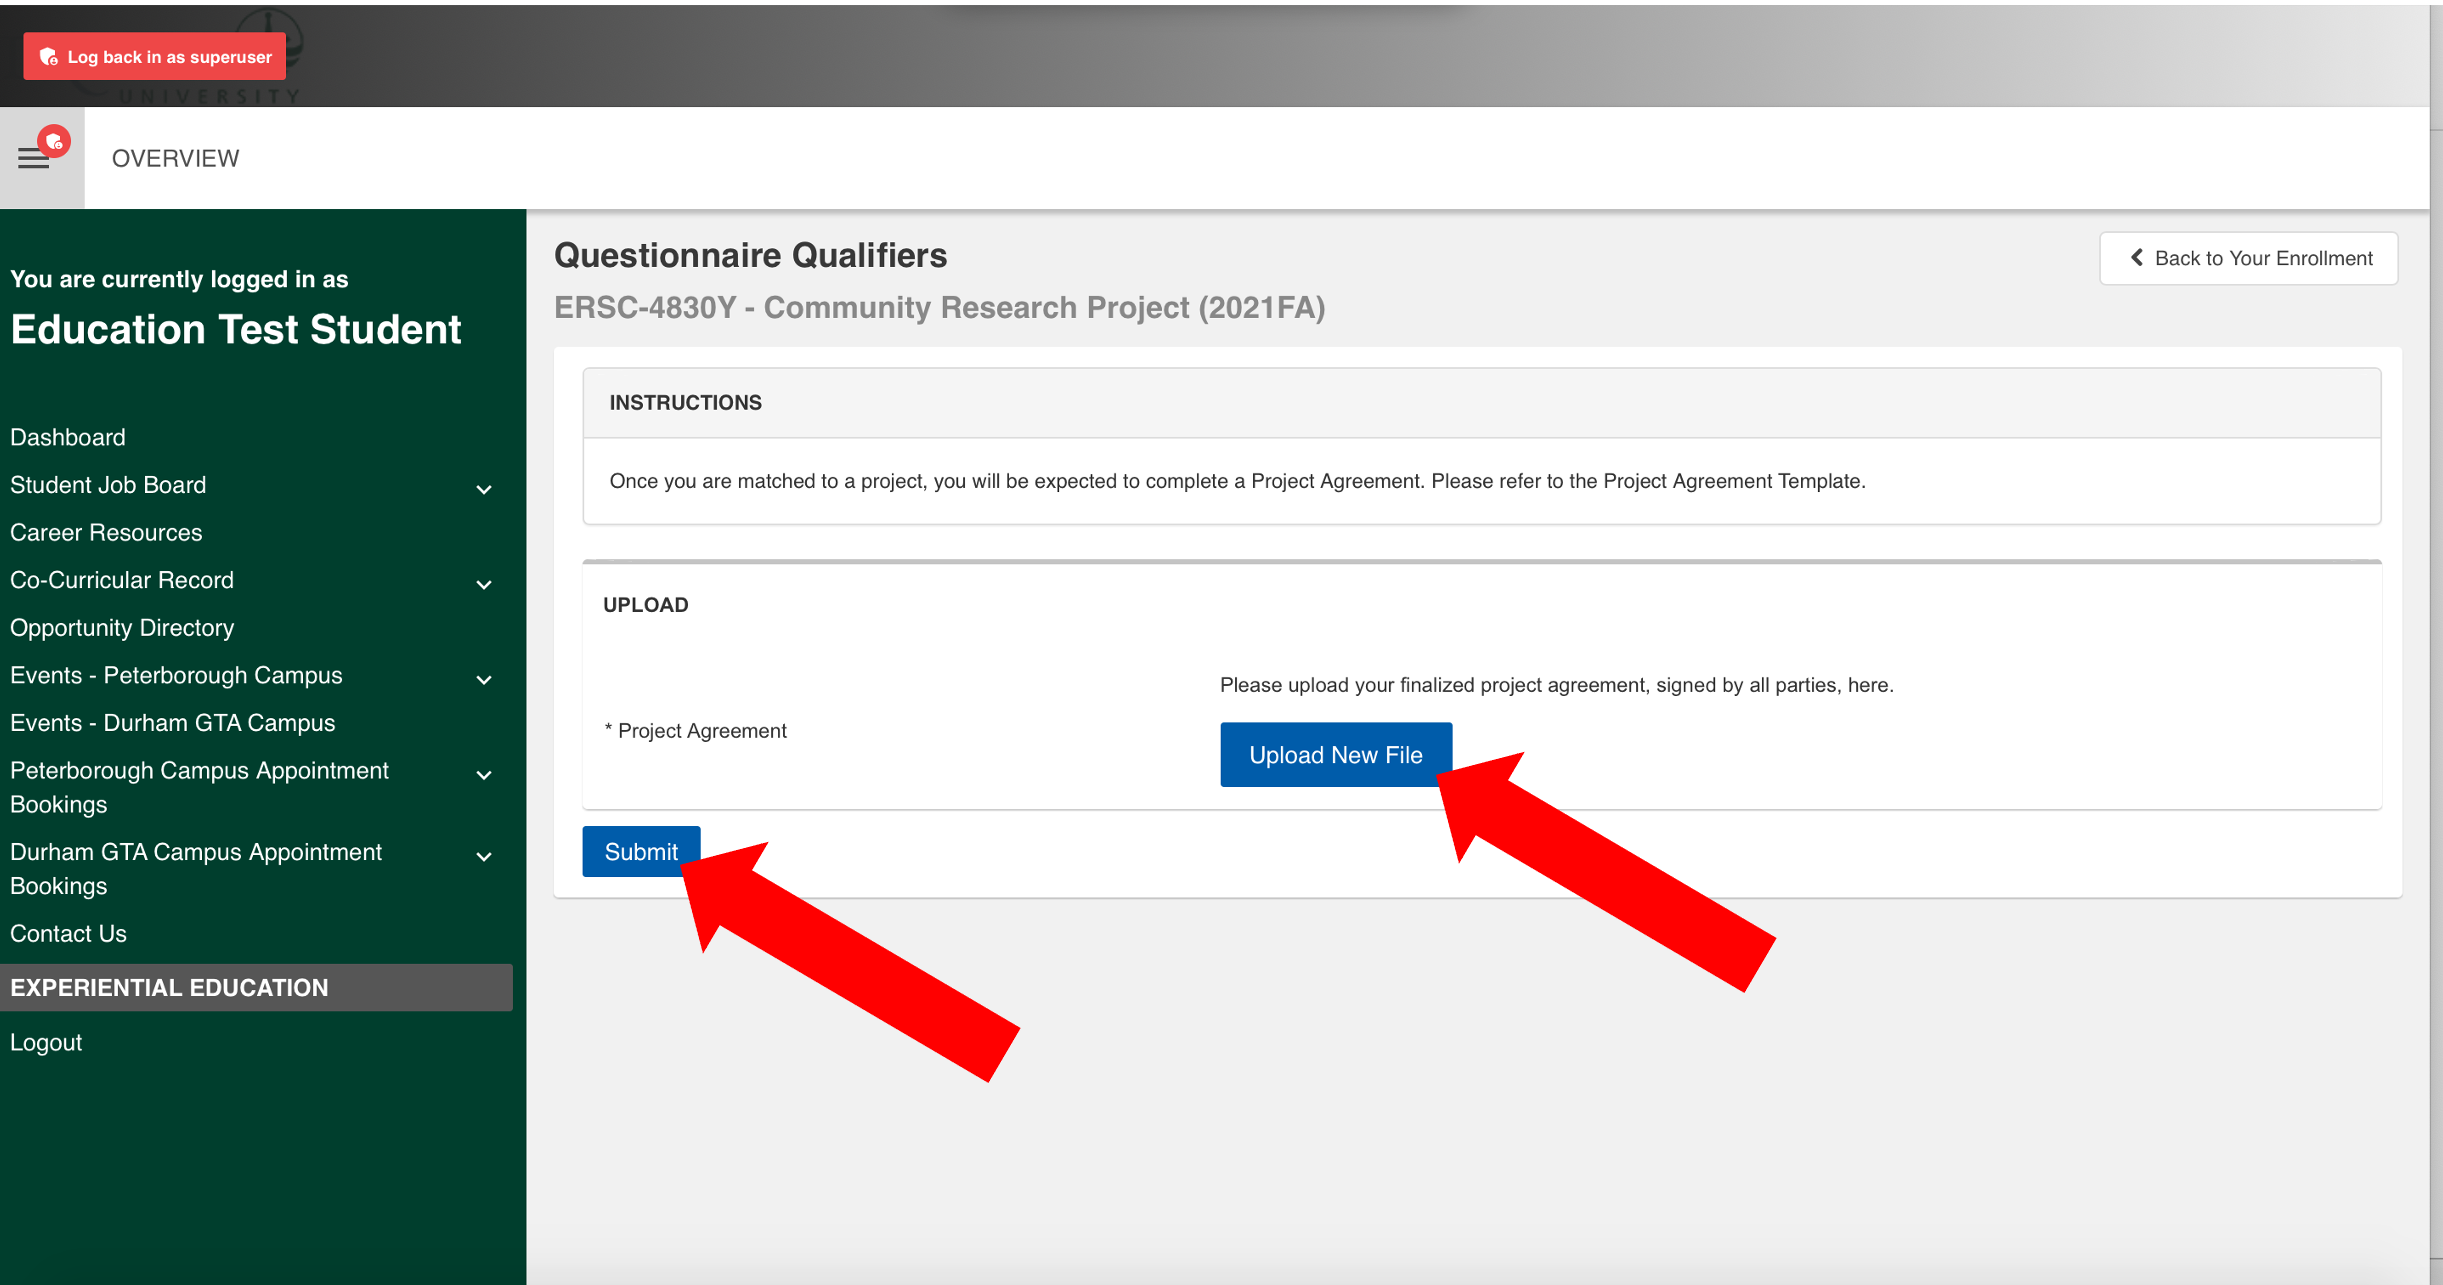 Screenshot of the project agreement submission with a red arrow pointing towards "Upload New File" and another red arrow pointing at "Submit". 